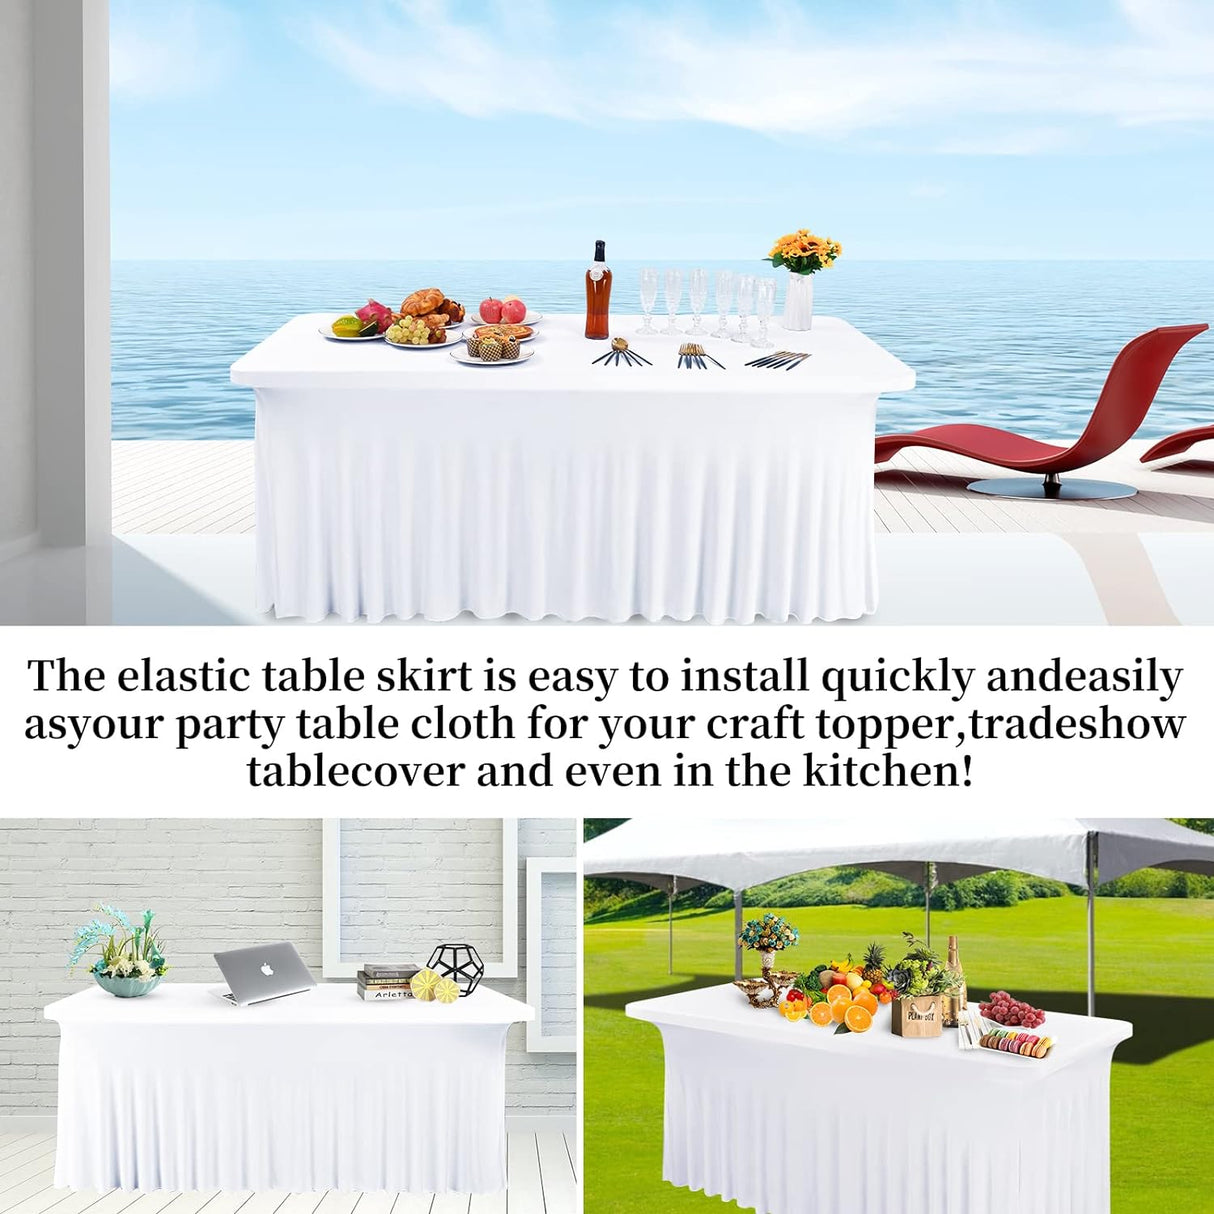 Spandex Table Skirt Fitted Royal Blue Stretch Tablecloth,1-Piece Wrinkle-Resistant Ruffles Design Installs in Seconds,Perfect for Rectangle Tables Banquets Party Wedding Thanksgiving